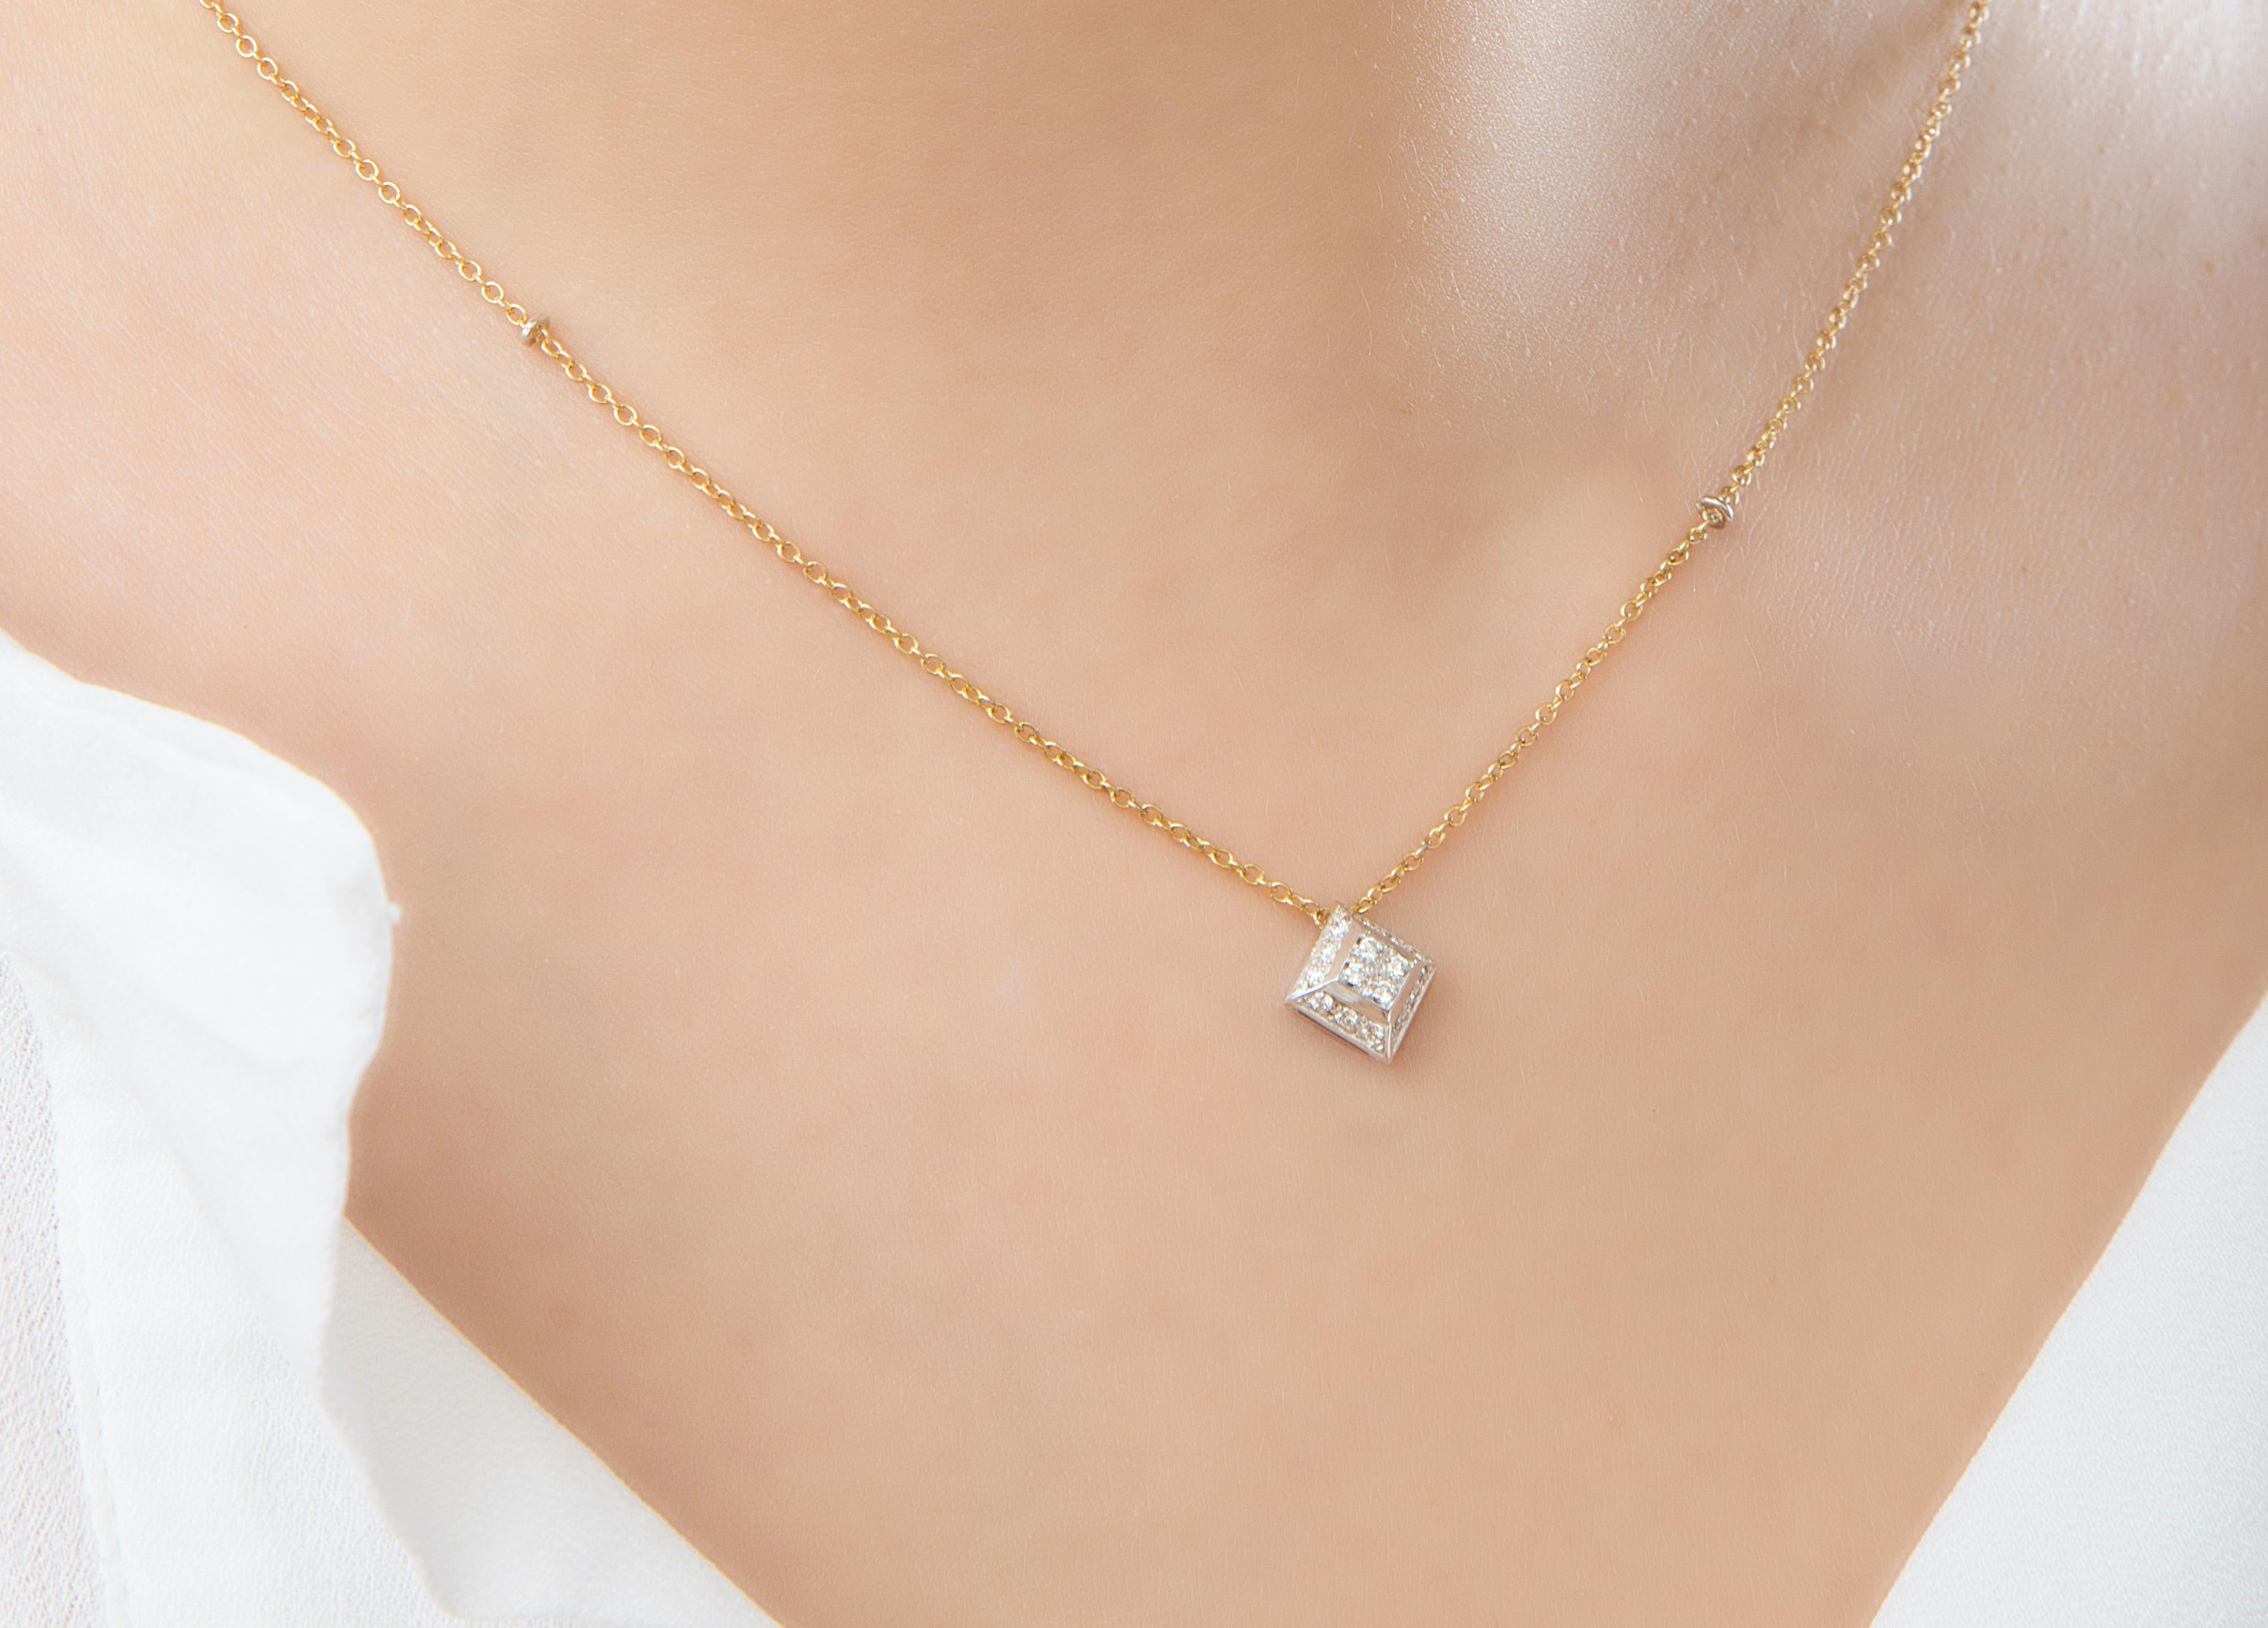 Rossella Ugolini Design Collection, 18 Karats Yellow Gold chain and 18k White Gold pendant enriched with 0.20 carats White Diamonds.
This Modern Necklace feature a square pyramid pendant adorned with 0.20 dazzling White Diamonds making a true